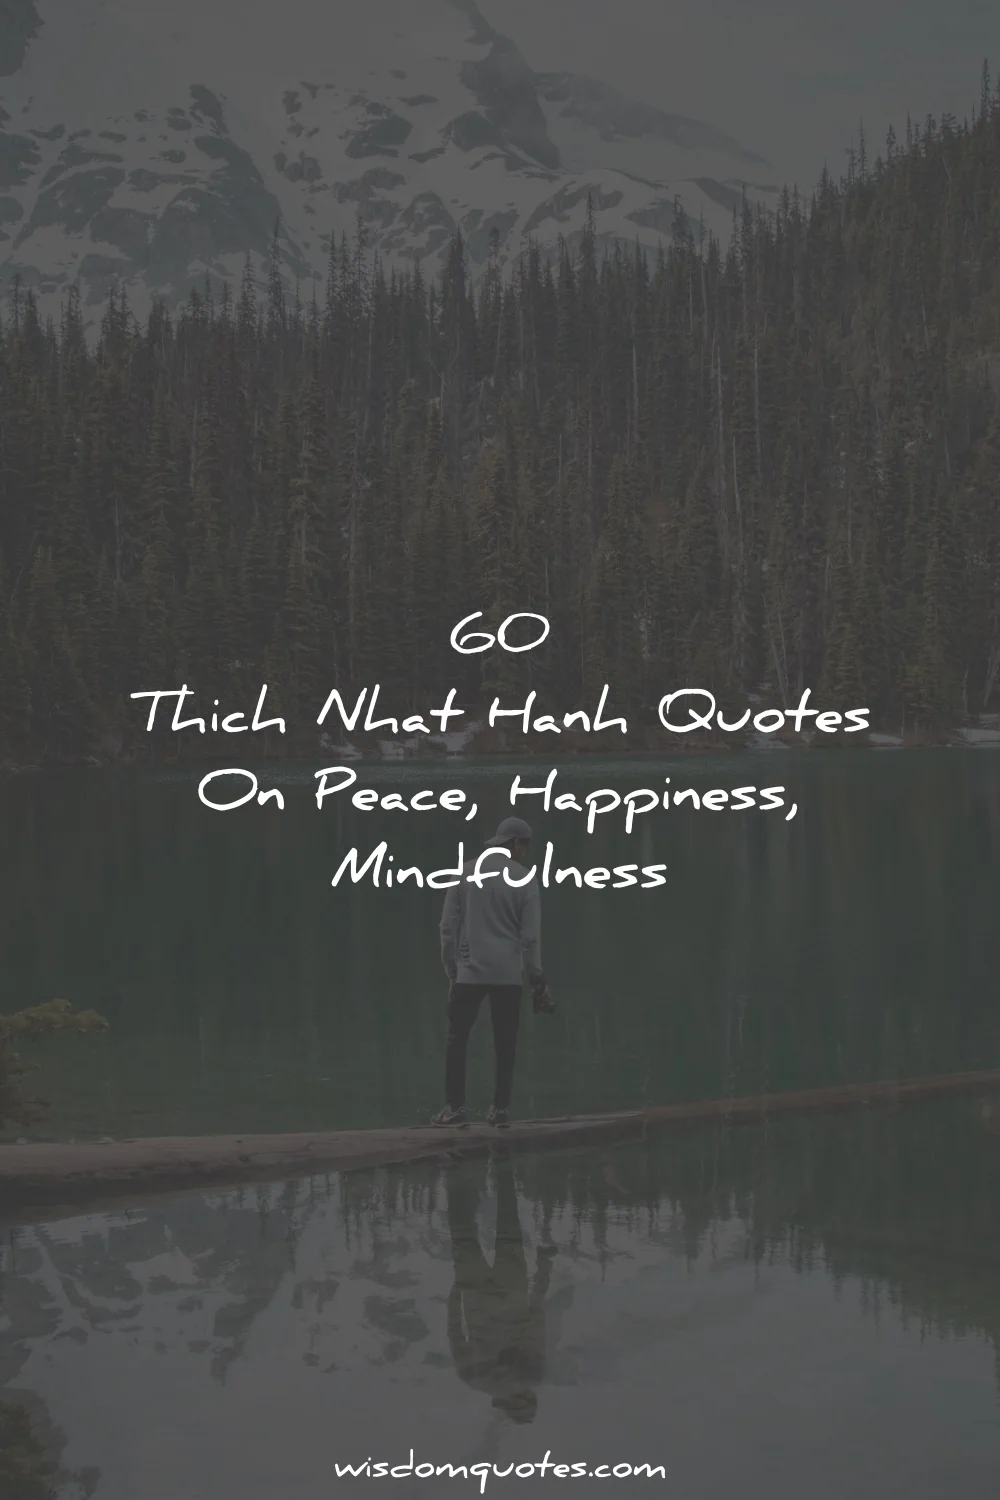 thich nhat hanh quotes peace happiness mindfulness wisdom